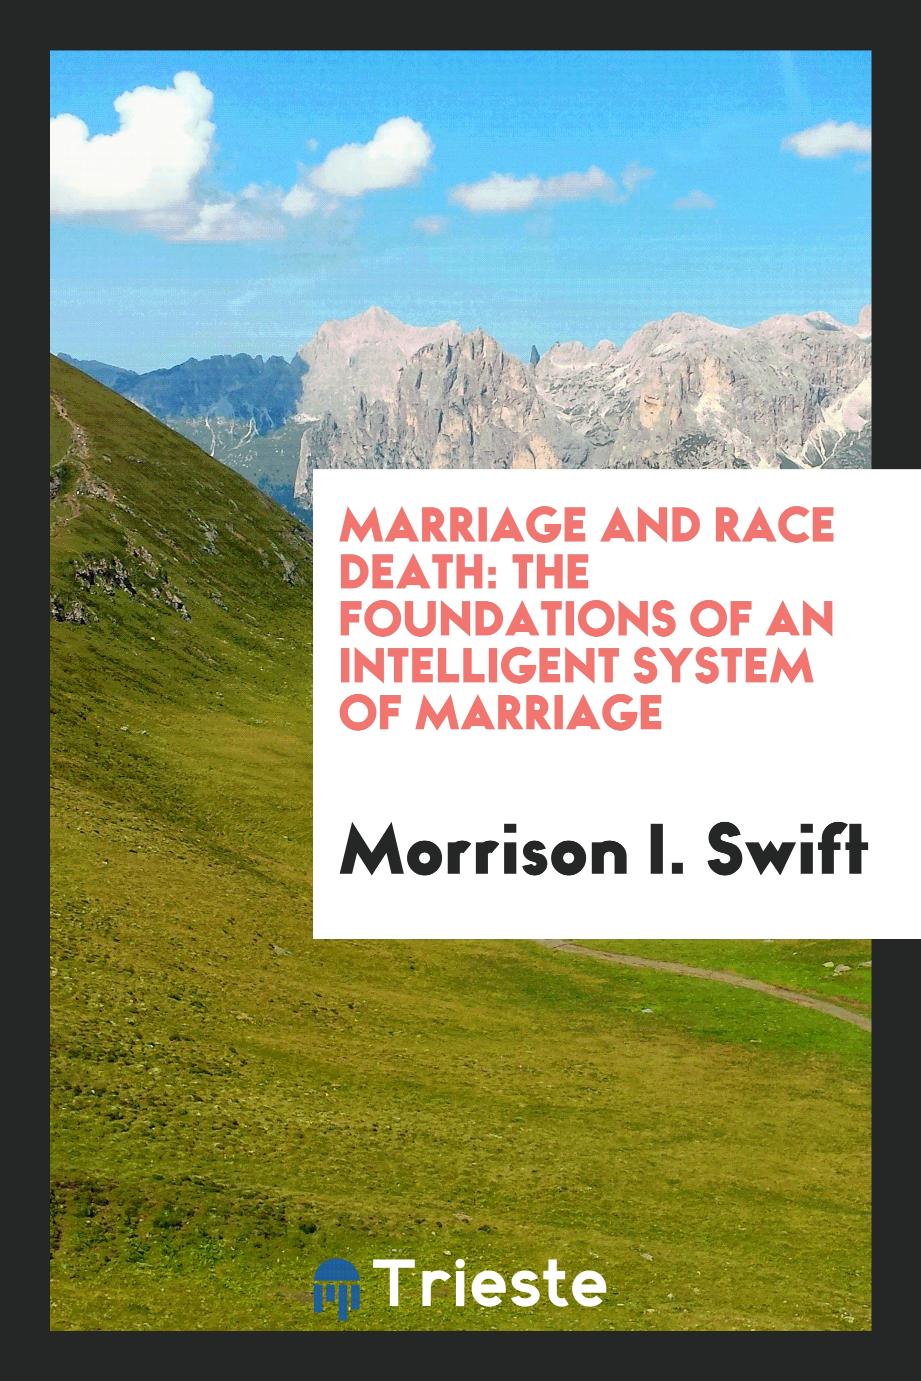 Marriage and Race Death: The Foundations of an Intelligent System of Marriage